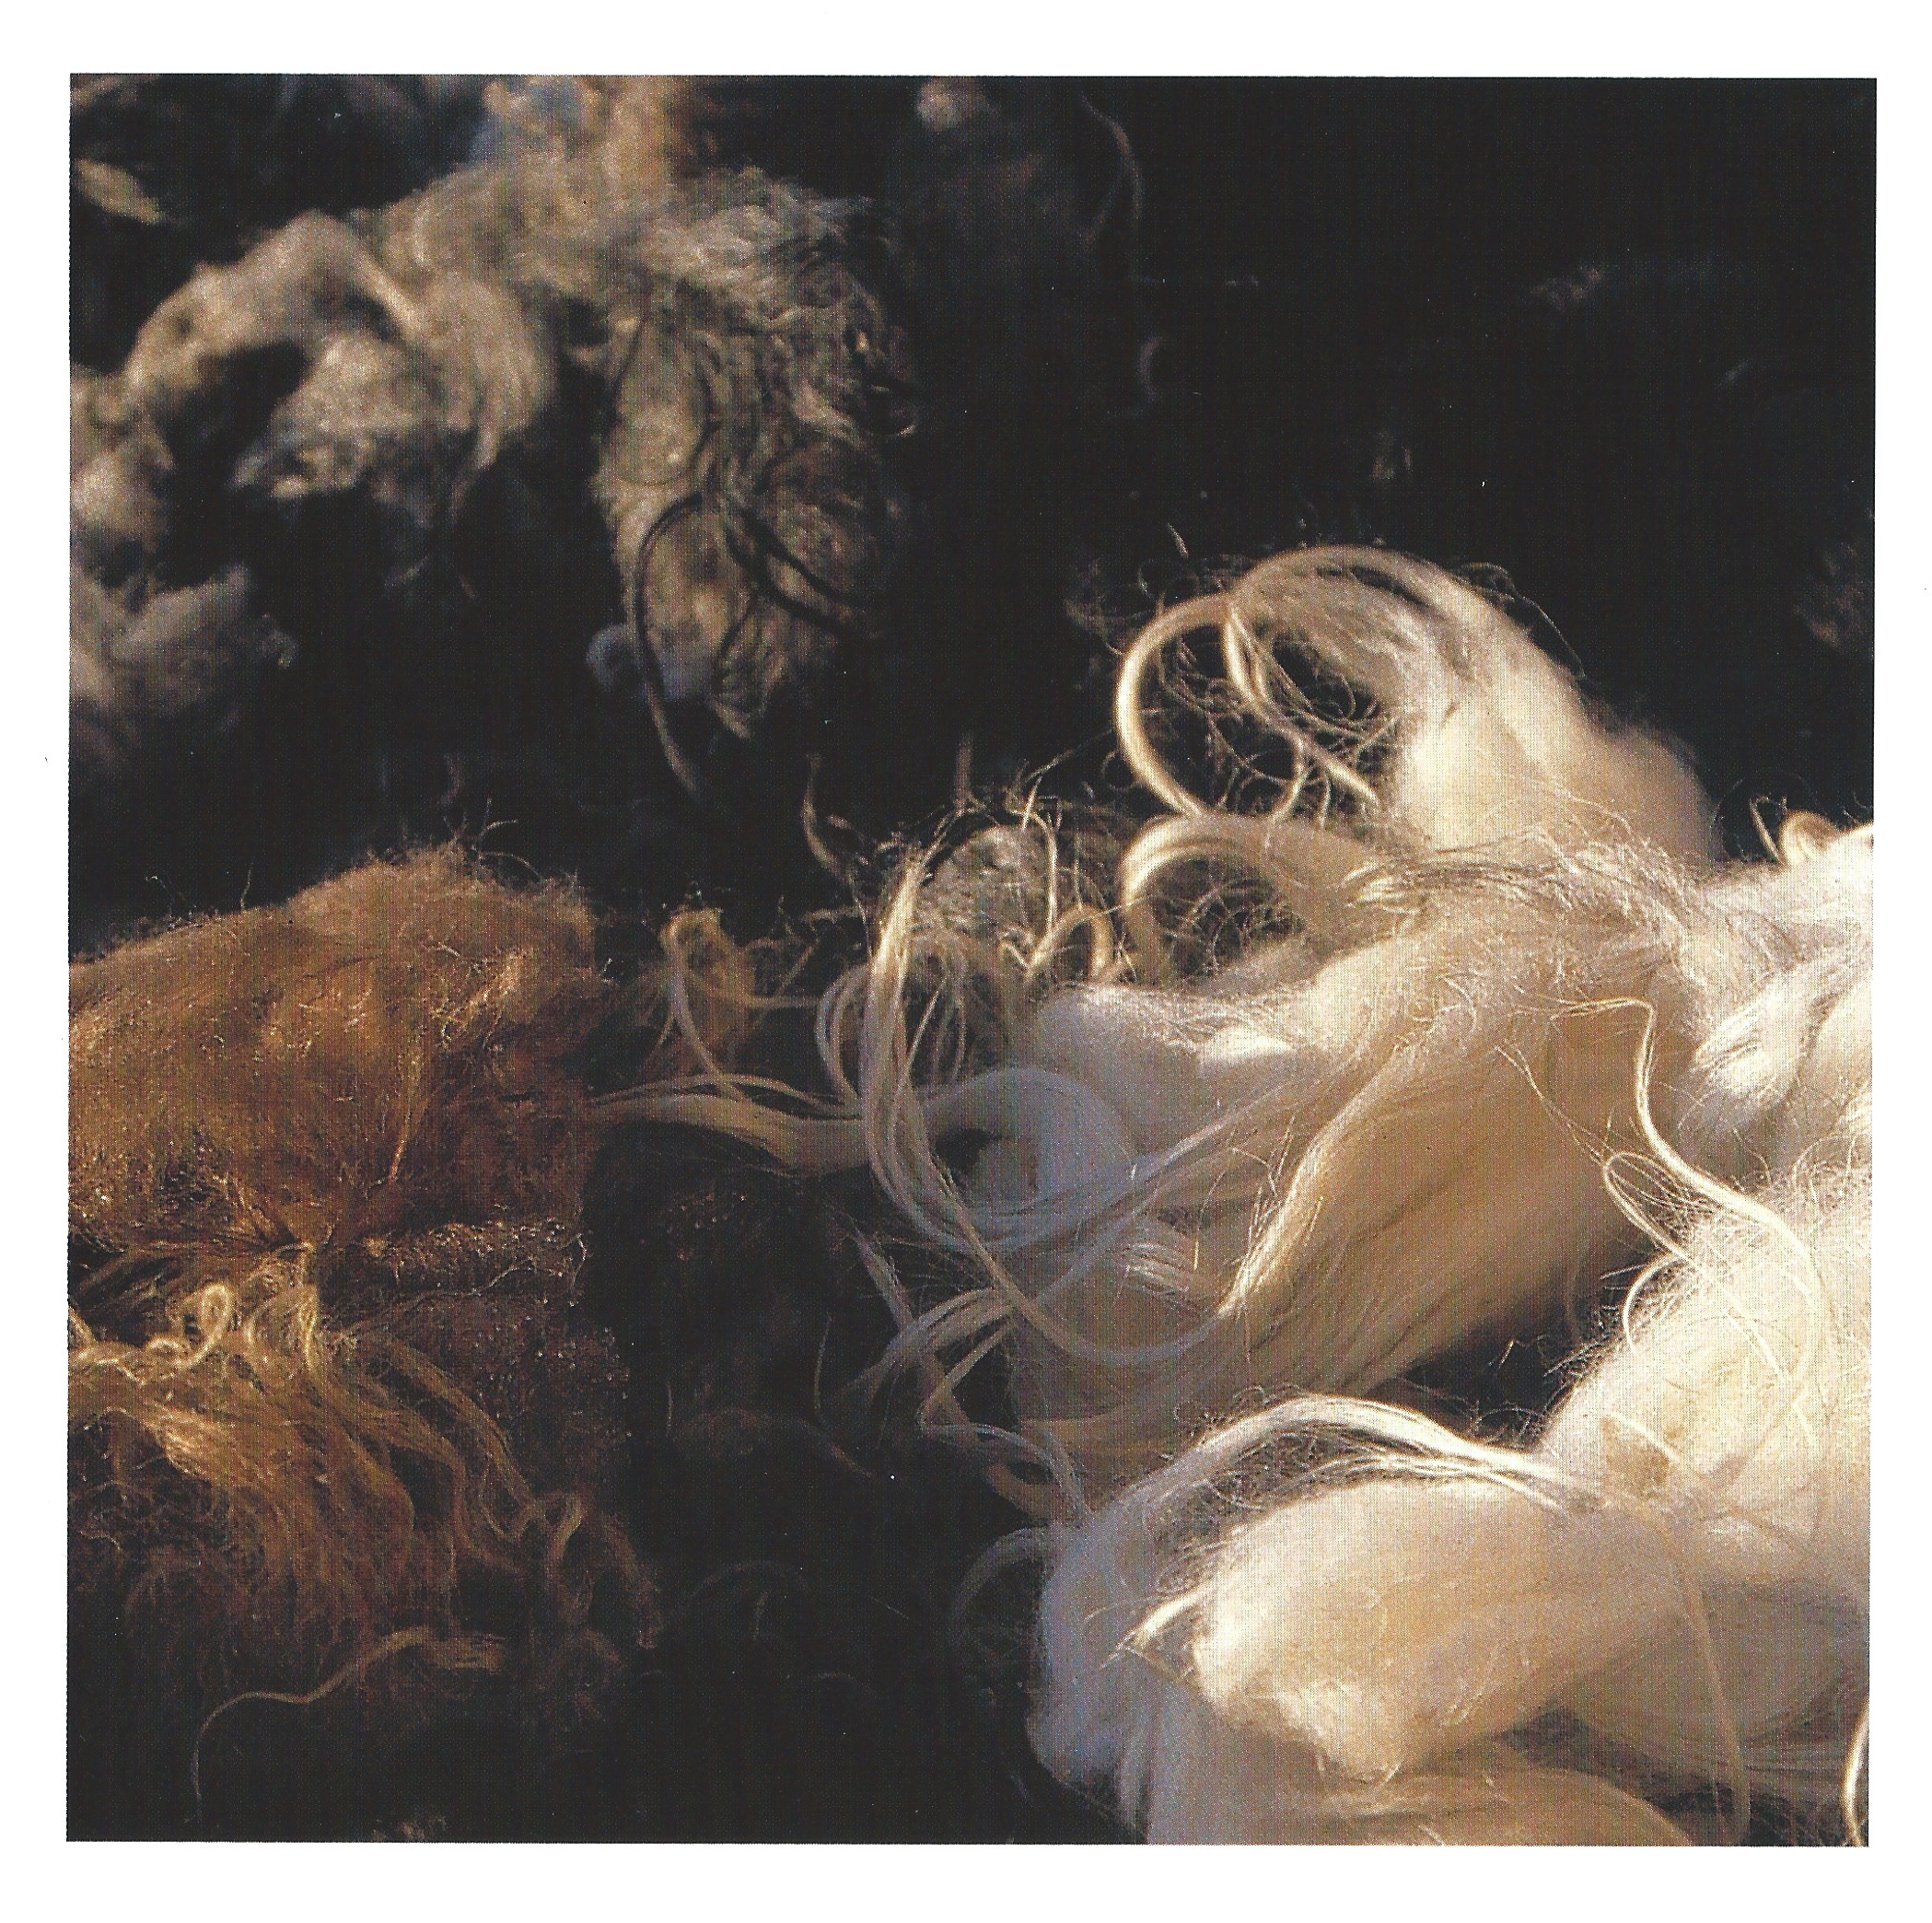 Wool in natural colors